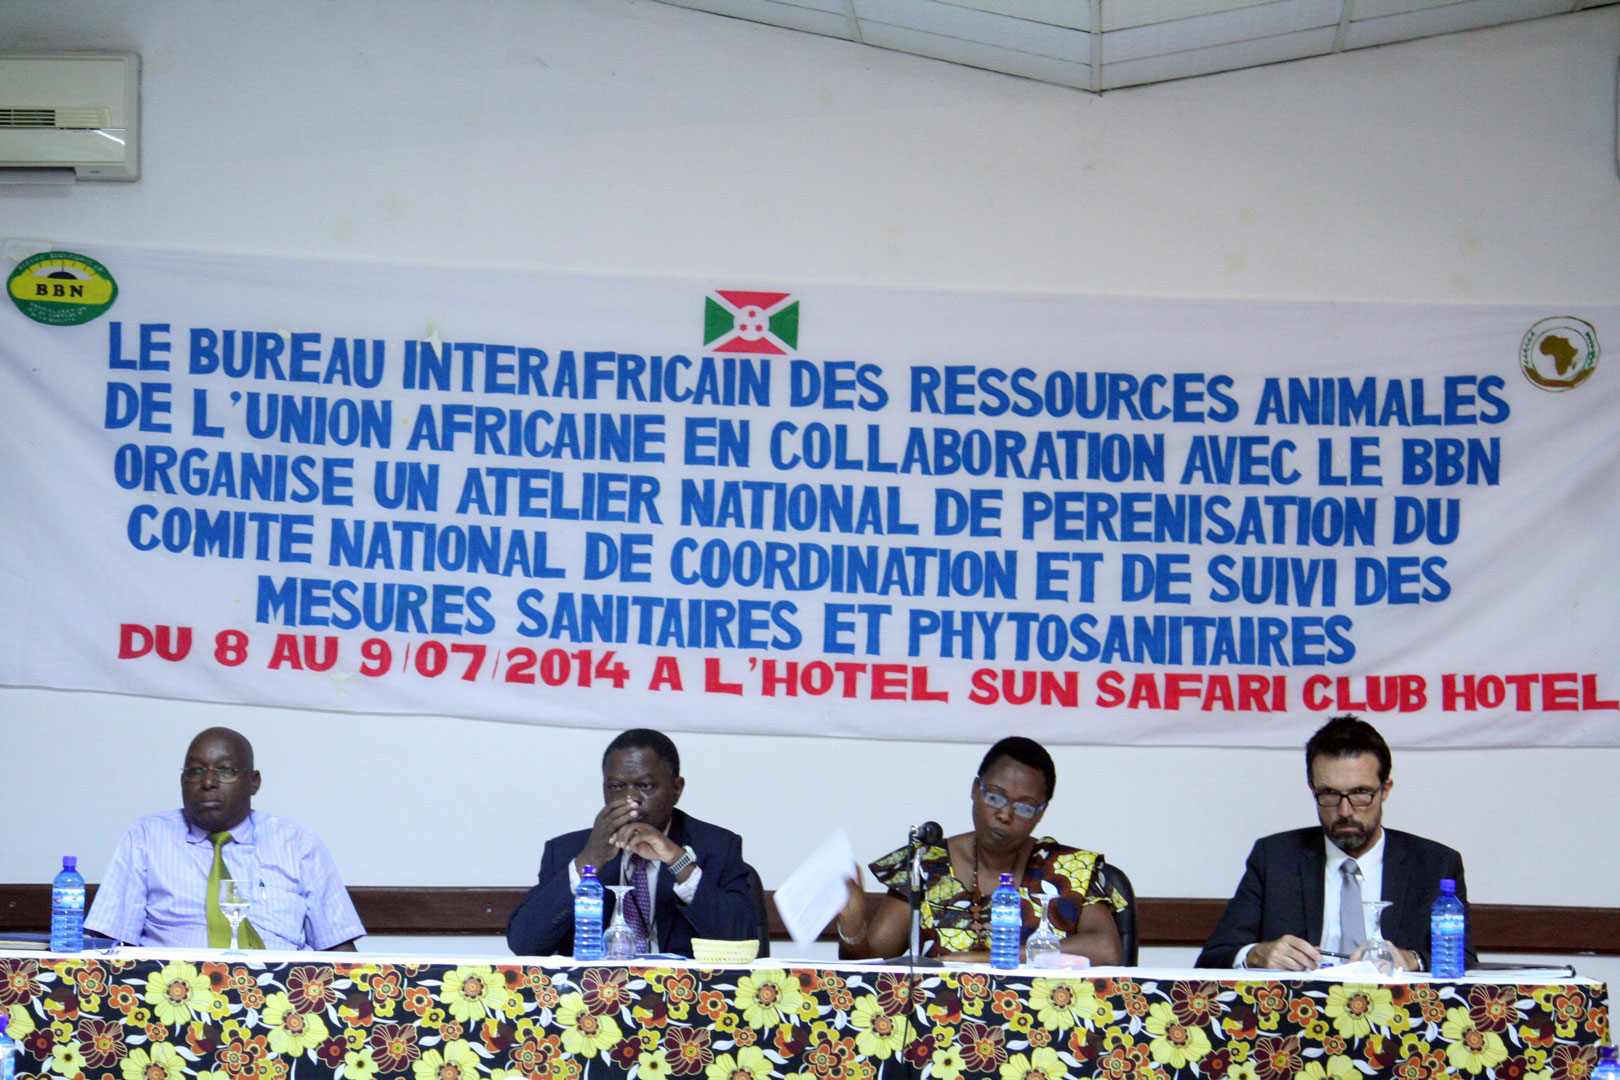  © 2014 AU-IBAR. The workshop was opened by Madam Marie Rose NIZIGIYIMANA, Minister for Trade, Industry, Posts and tourism of the Republic of Burundi (3rd from left)